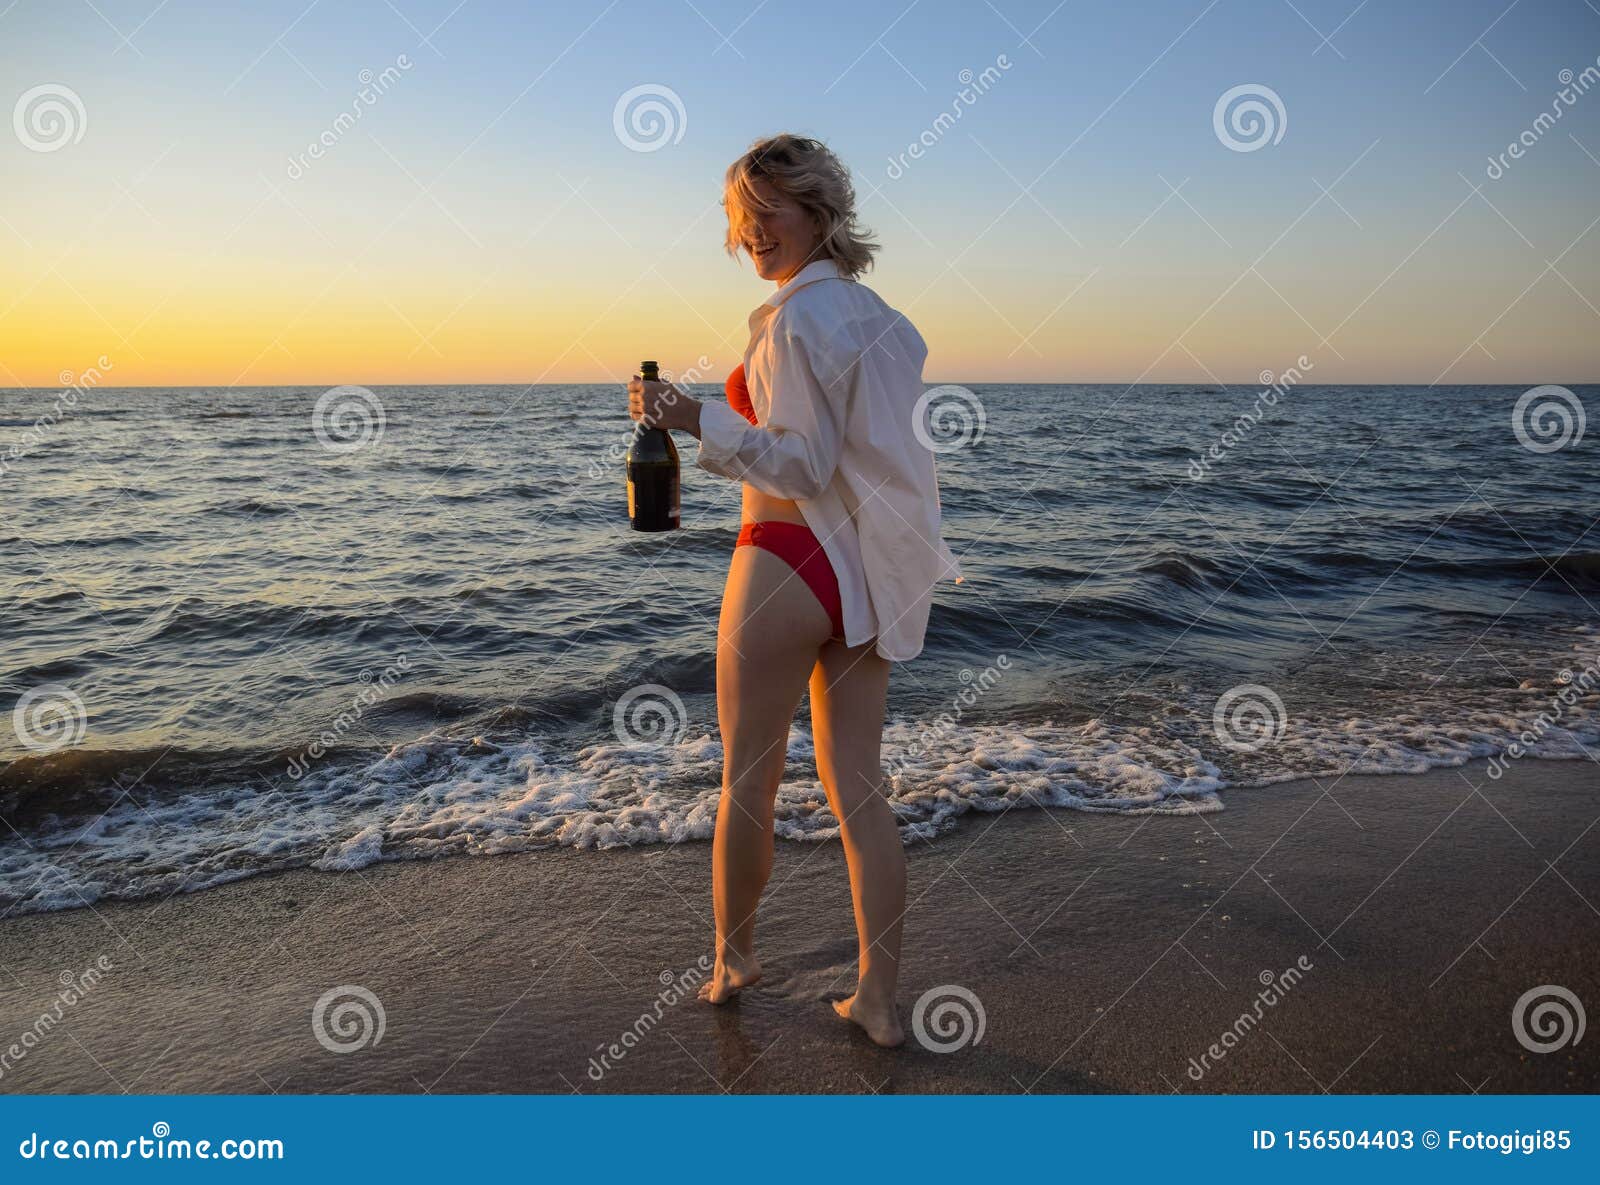 Sexy Female Bottle Champagne Stock Images Download 33 Royalty Free Photos